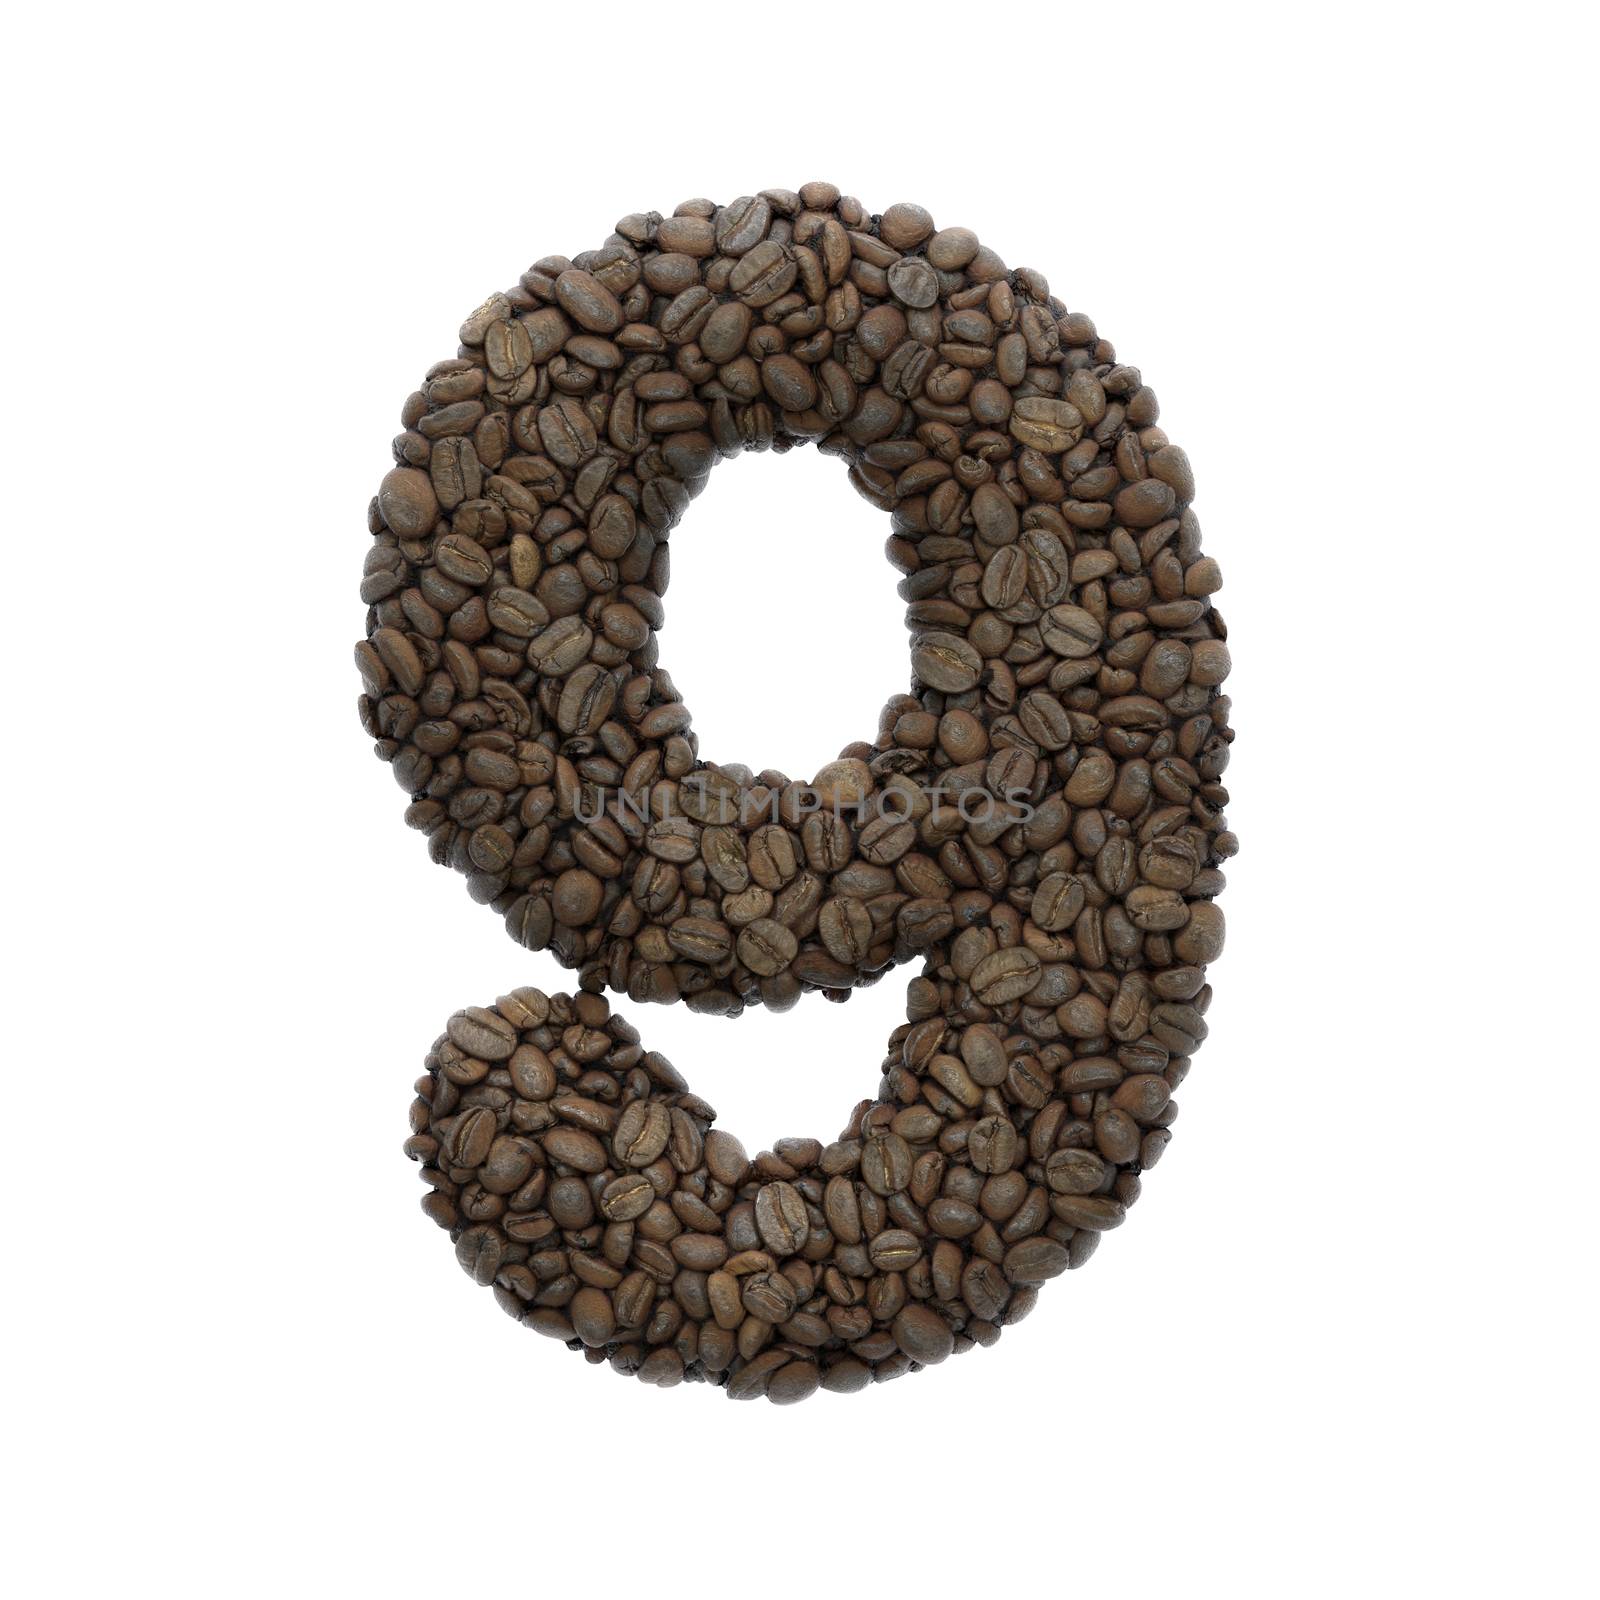 Coffee number 9 - 3d roasted beans digit isolated on white background. This alphabet is perfect for creative illustrations related but not limited to Coffee, energy, insomnia...